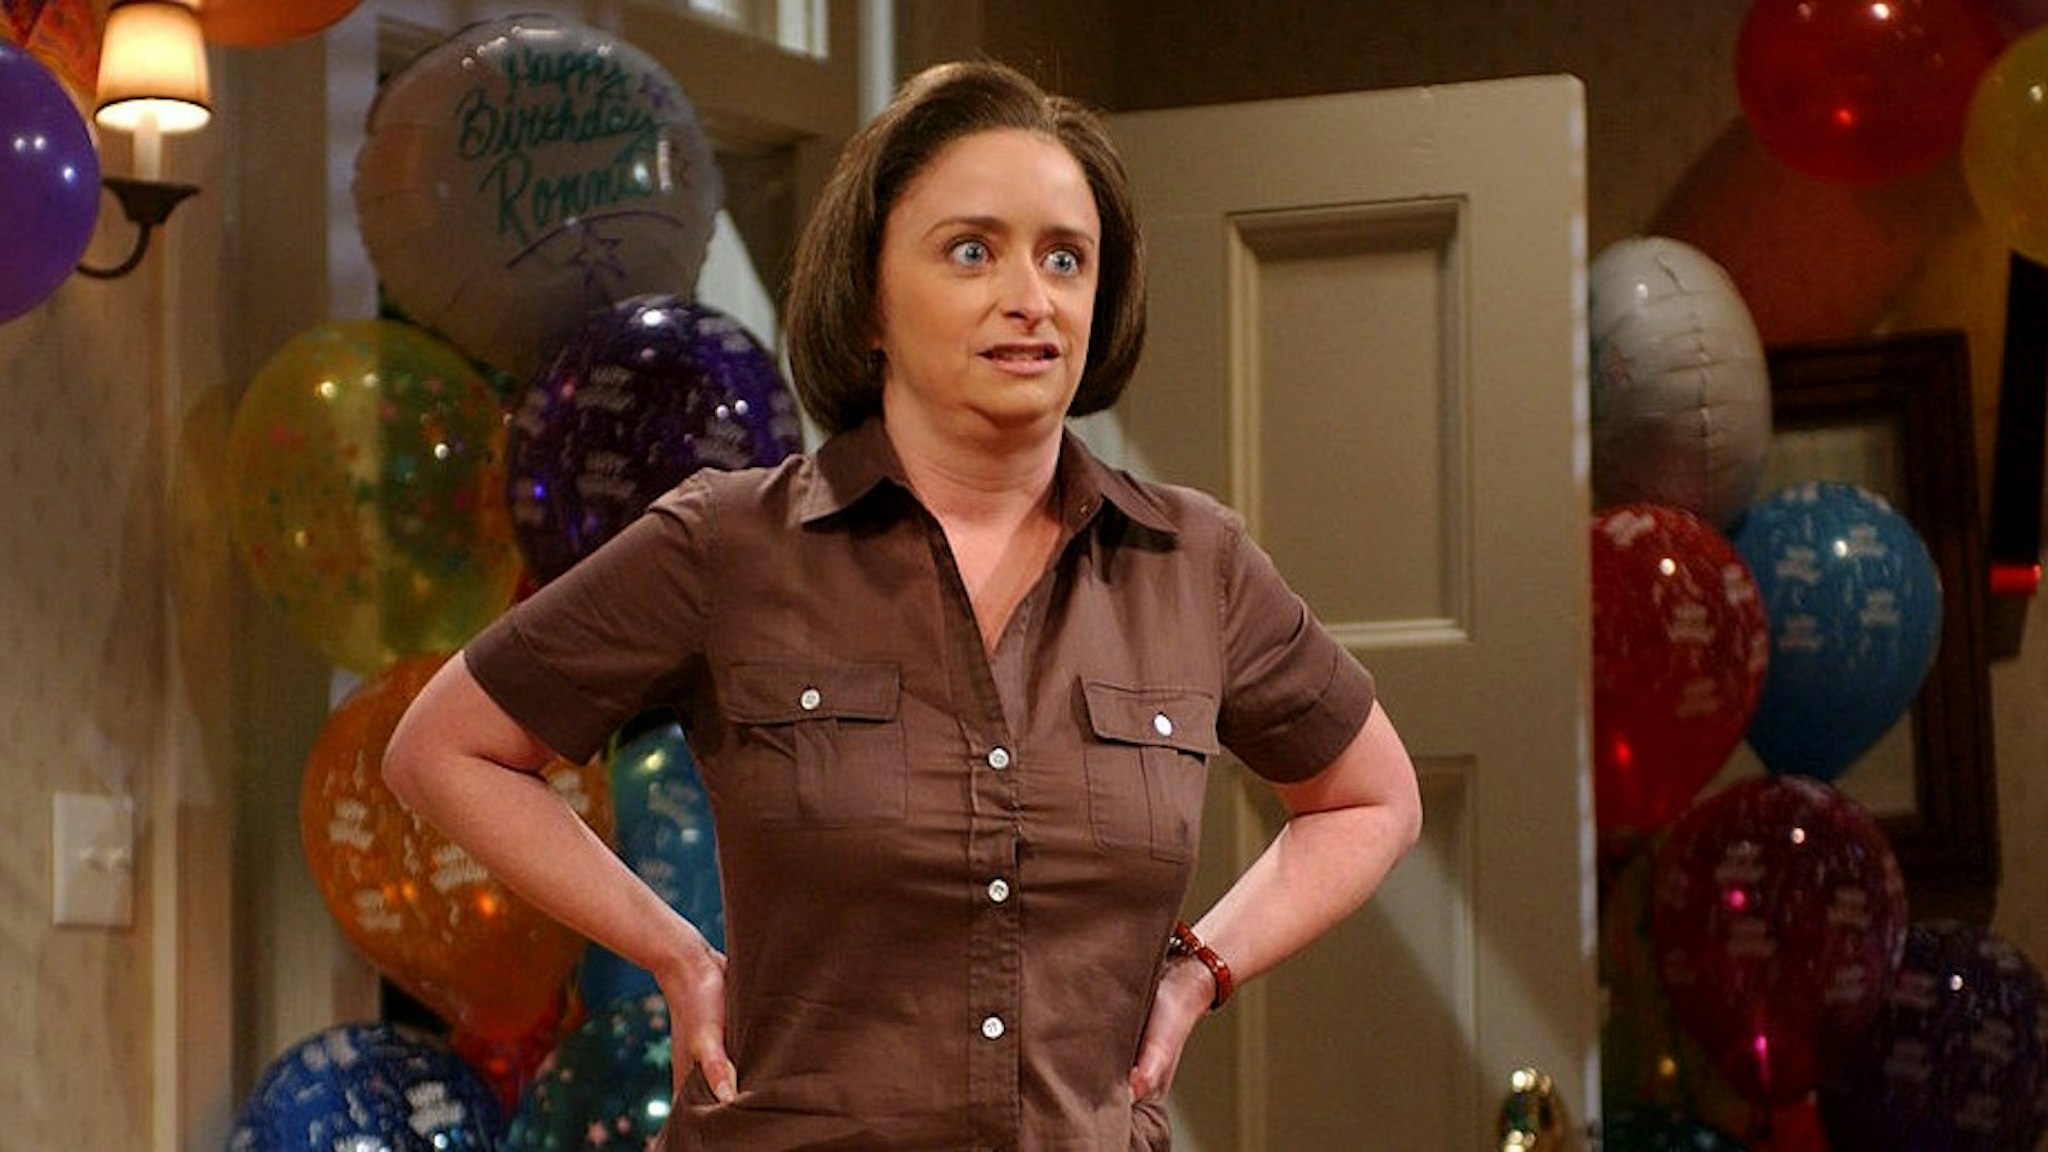 SATURDAY NIGHT LIVE -- Episode 1 -- Aired 10/02/2004 -- Pictured: Rachel Dratch as Debbie Downer during "Debbie Downer" skit (Photo by